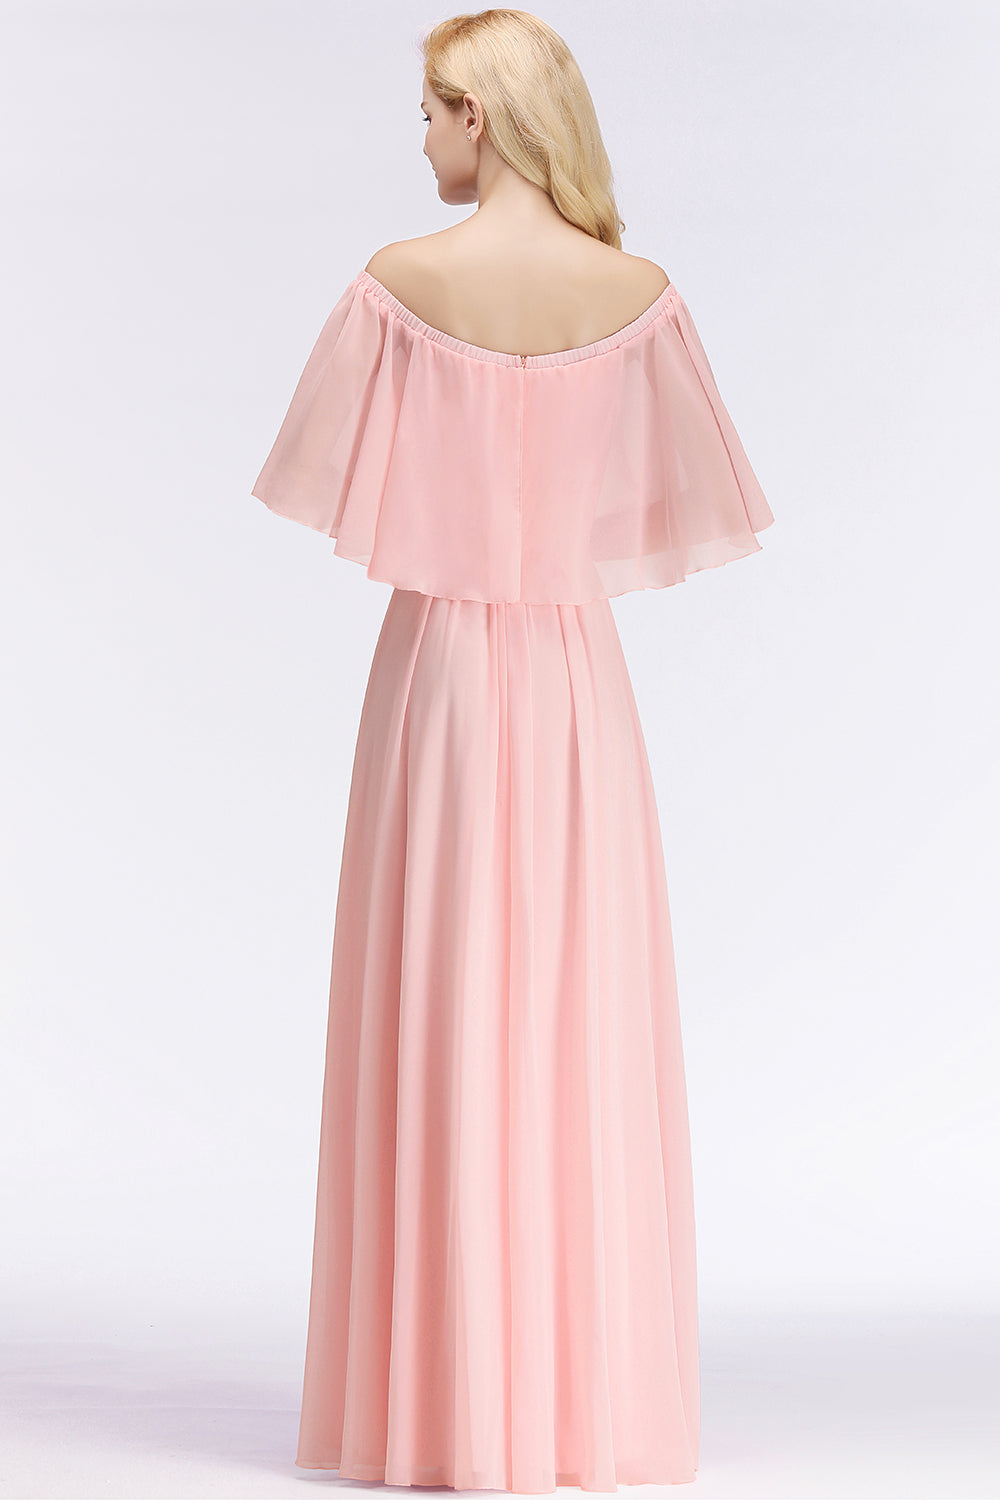 Affordable Flounced Crinkle Halter Bridesmaid Dresses Modest Pink Chiffon Wedding Party Dress